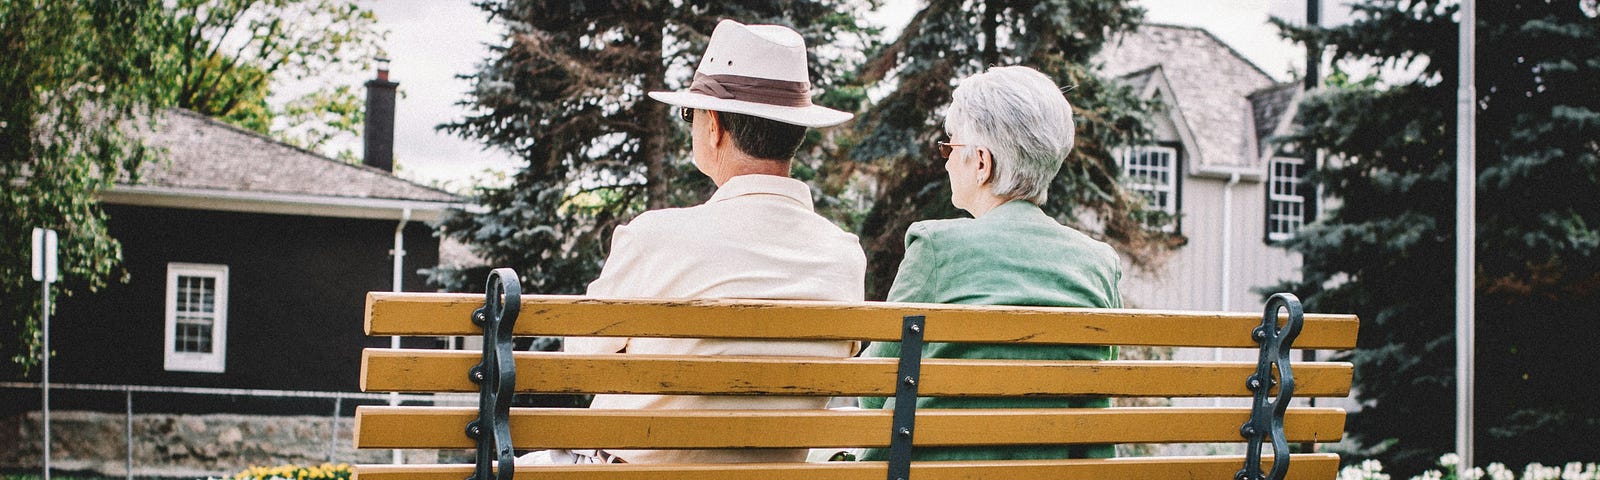 A man of retirement age wearing a Panama hat sits on a slat bench with his female companion peering across a green area covered in green grass and clover within view of homes and a colorful flower bed.